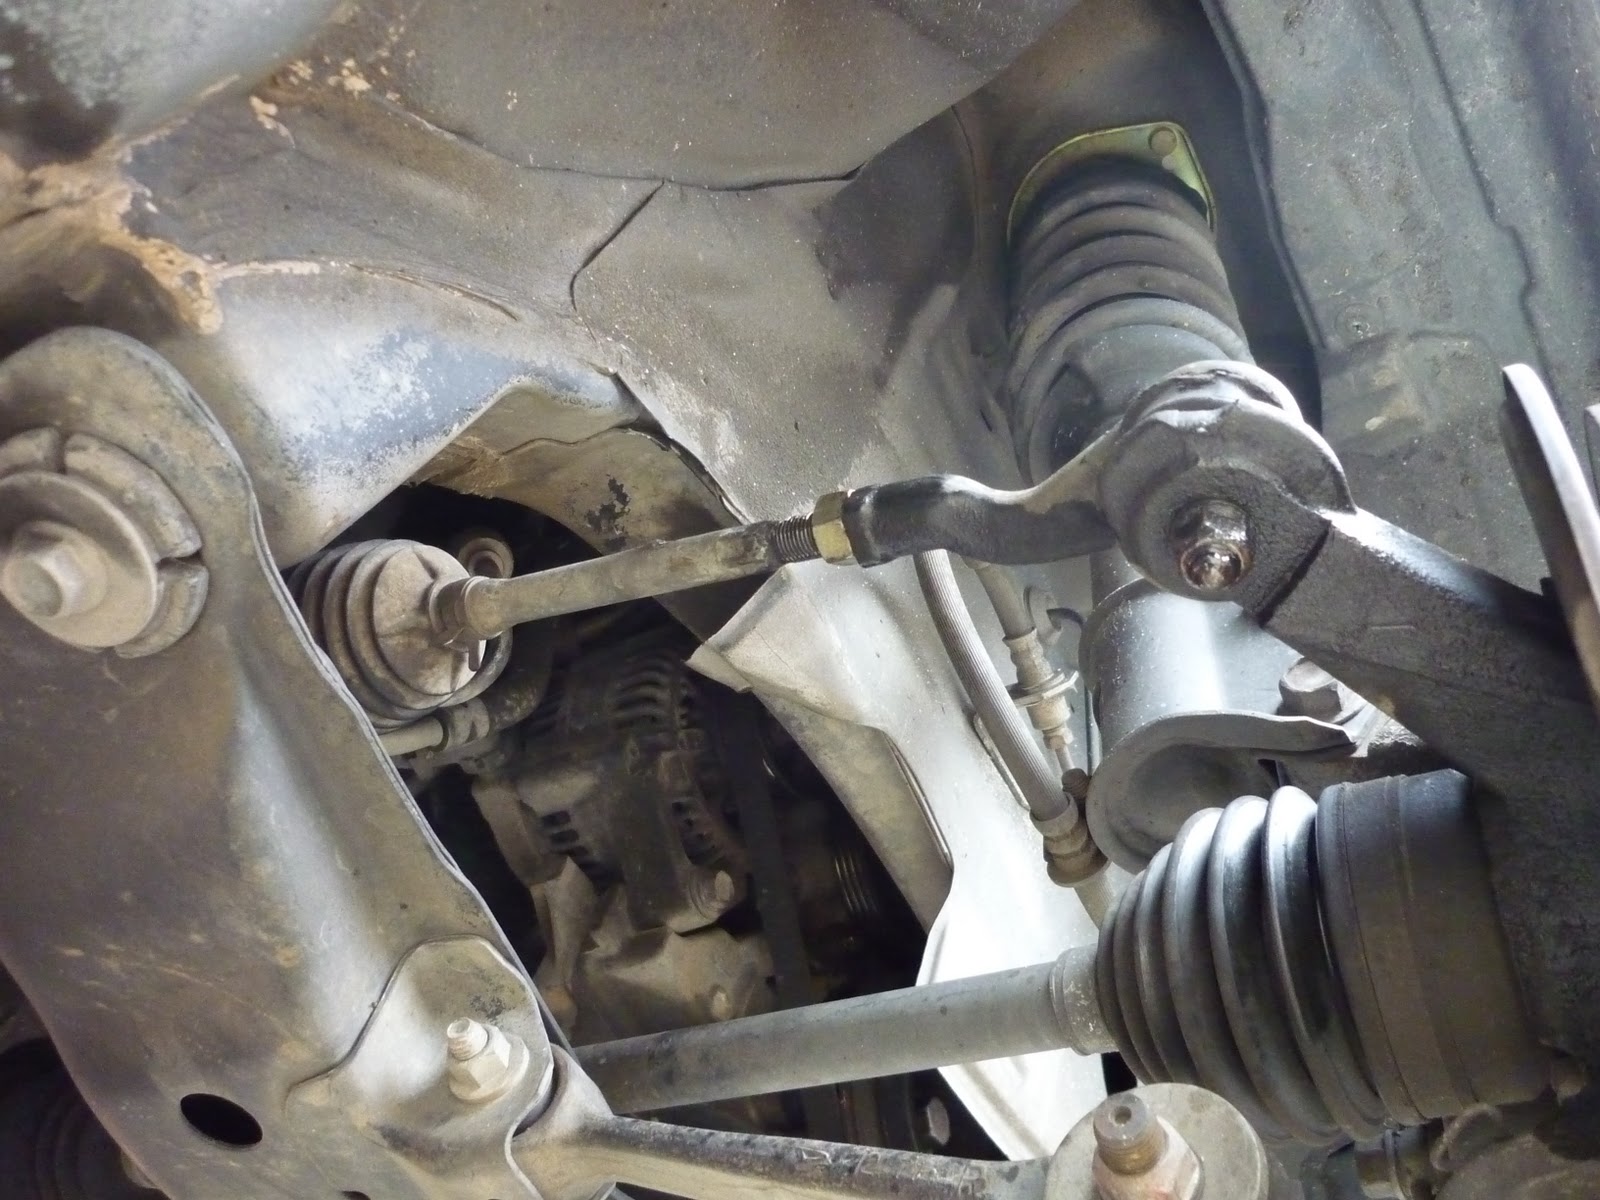 DIY: Fix On Your Own: Tie Rod, Rack End and Manual Alignment